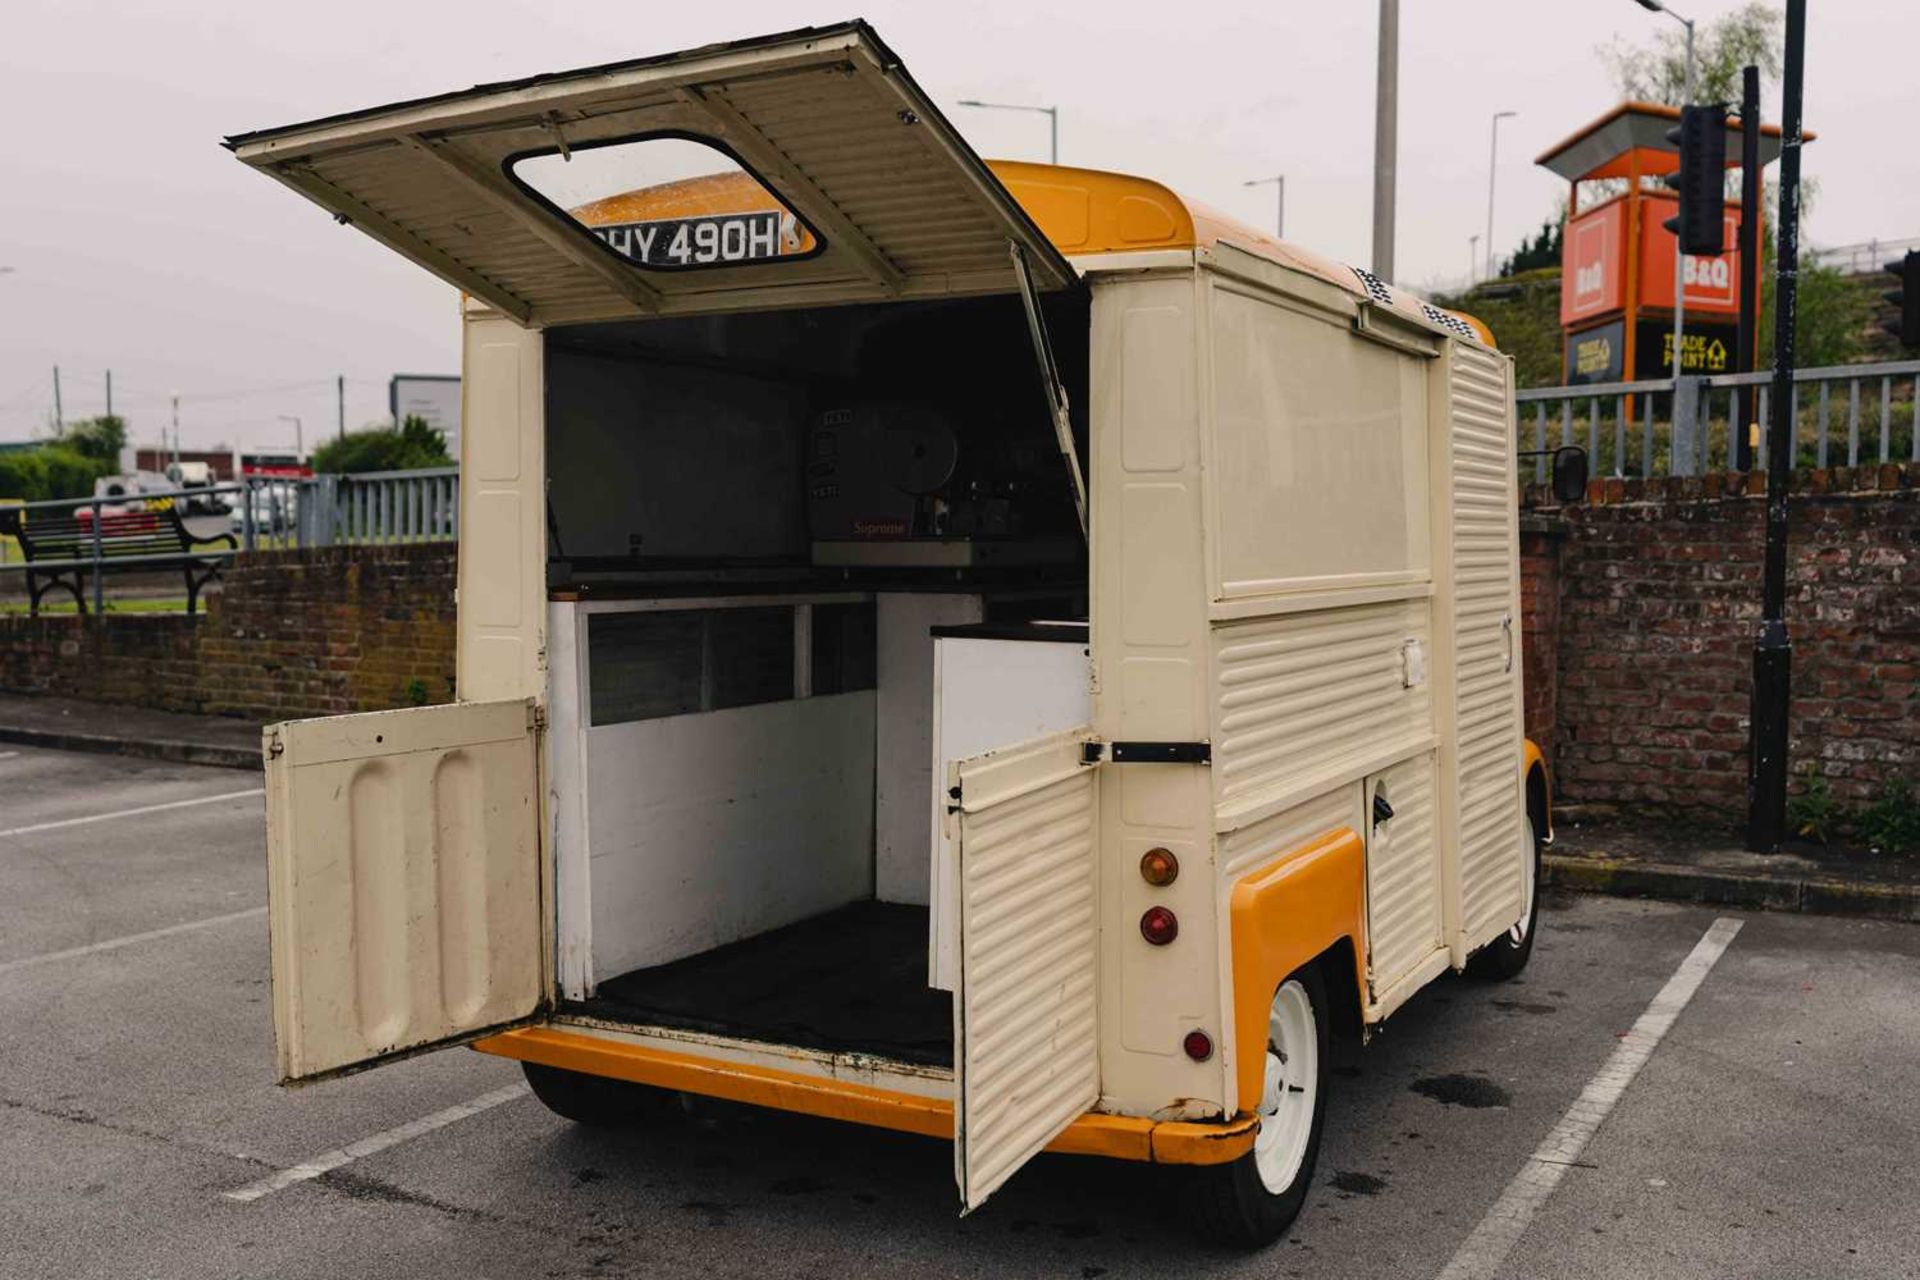 1970 Citroen HY Van Fully fitted-out boutique catering van ready to go into business - Image 43 of 59